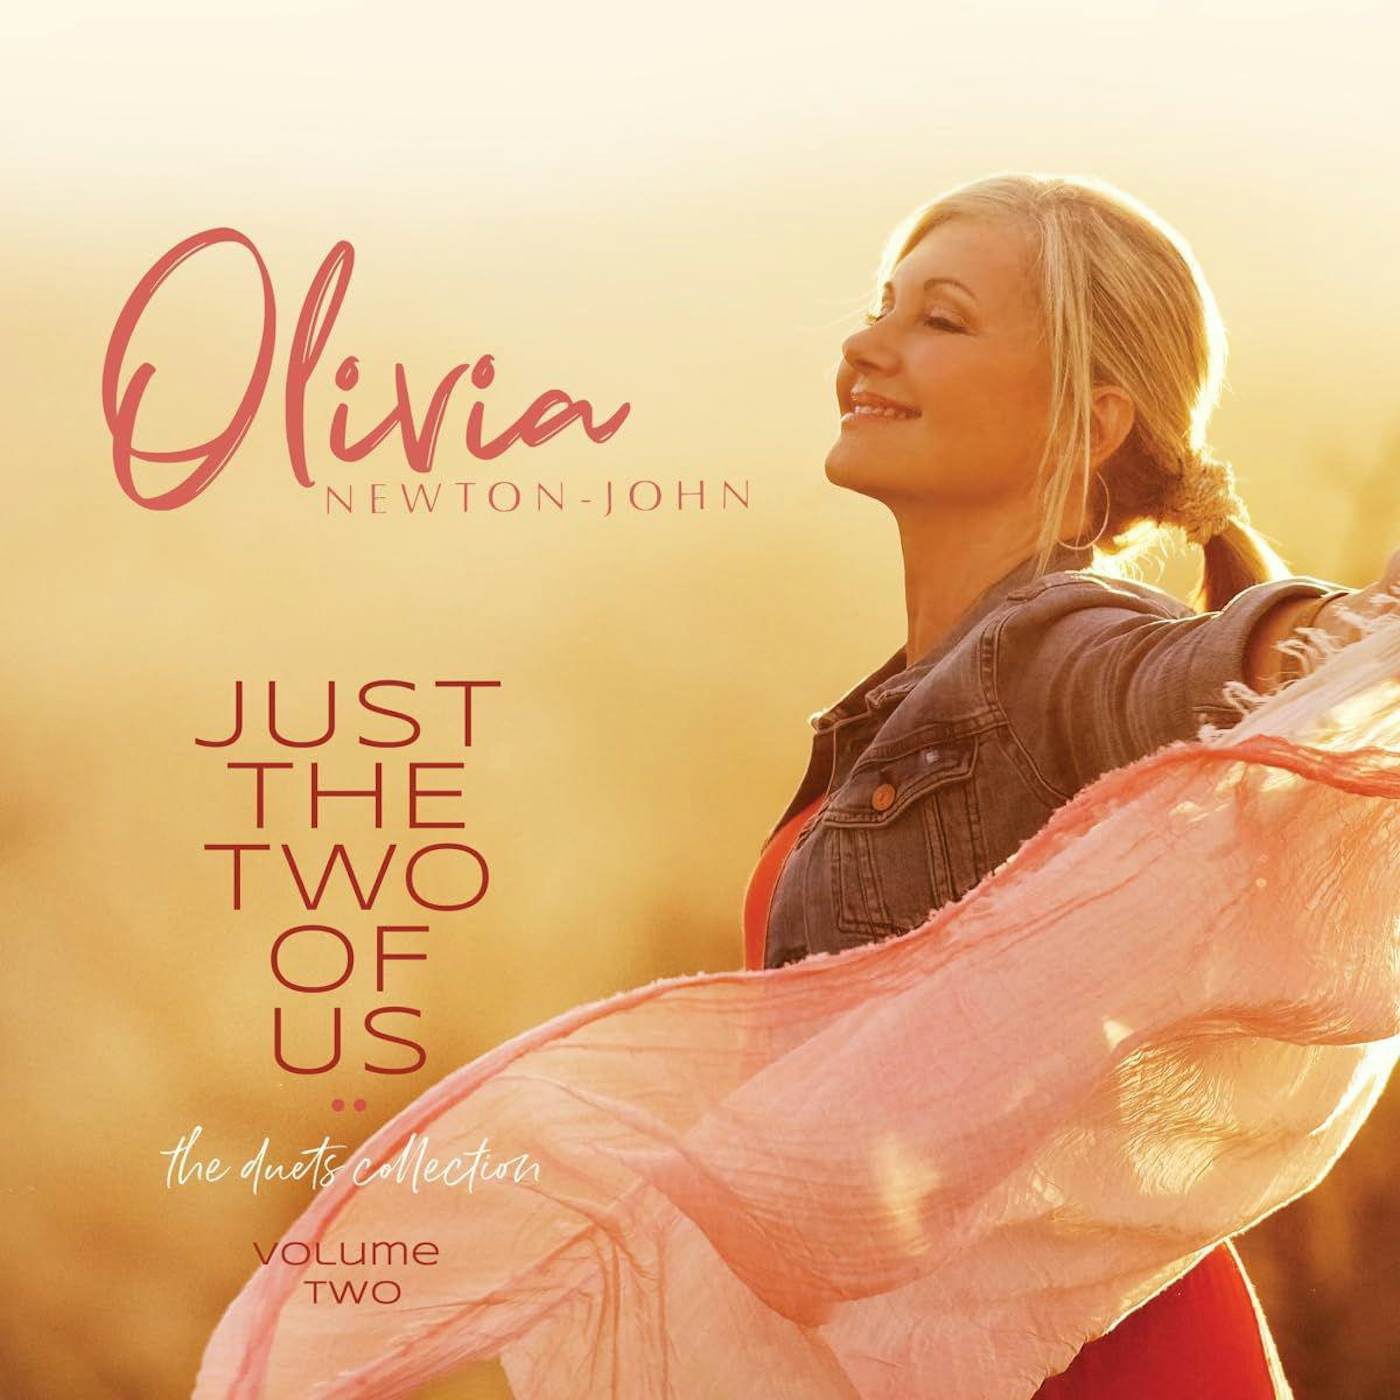 Olivia Newton-John Just The Two Of Us: The Duets Collection (Vol 2) Vinyl Record